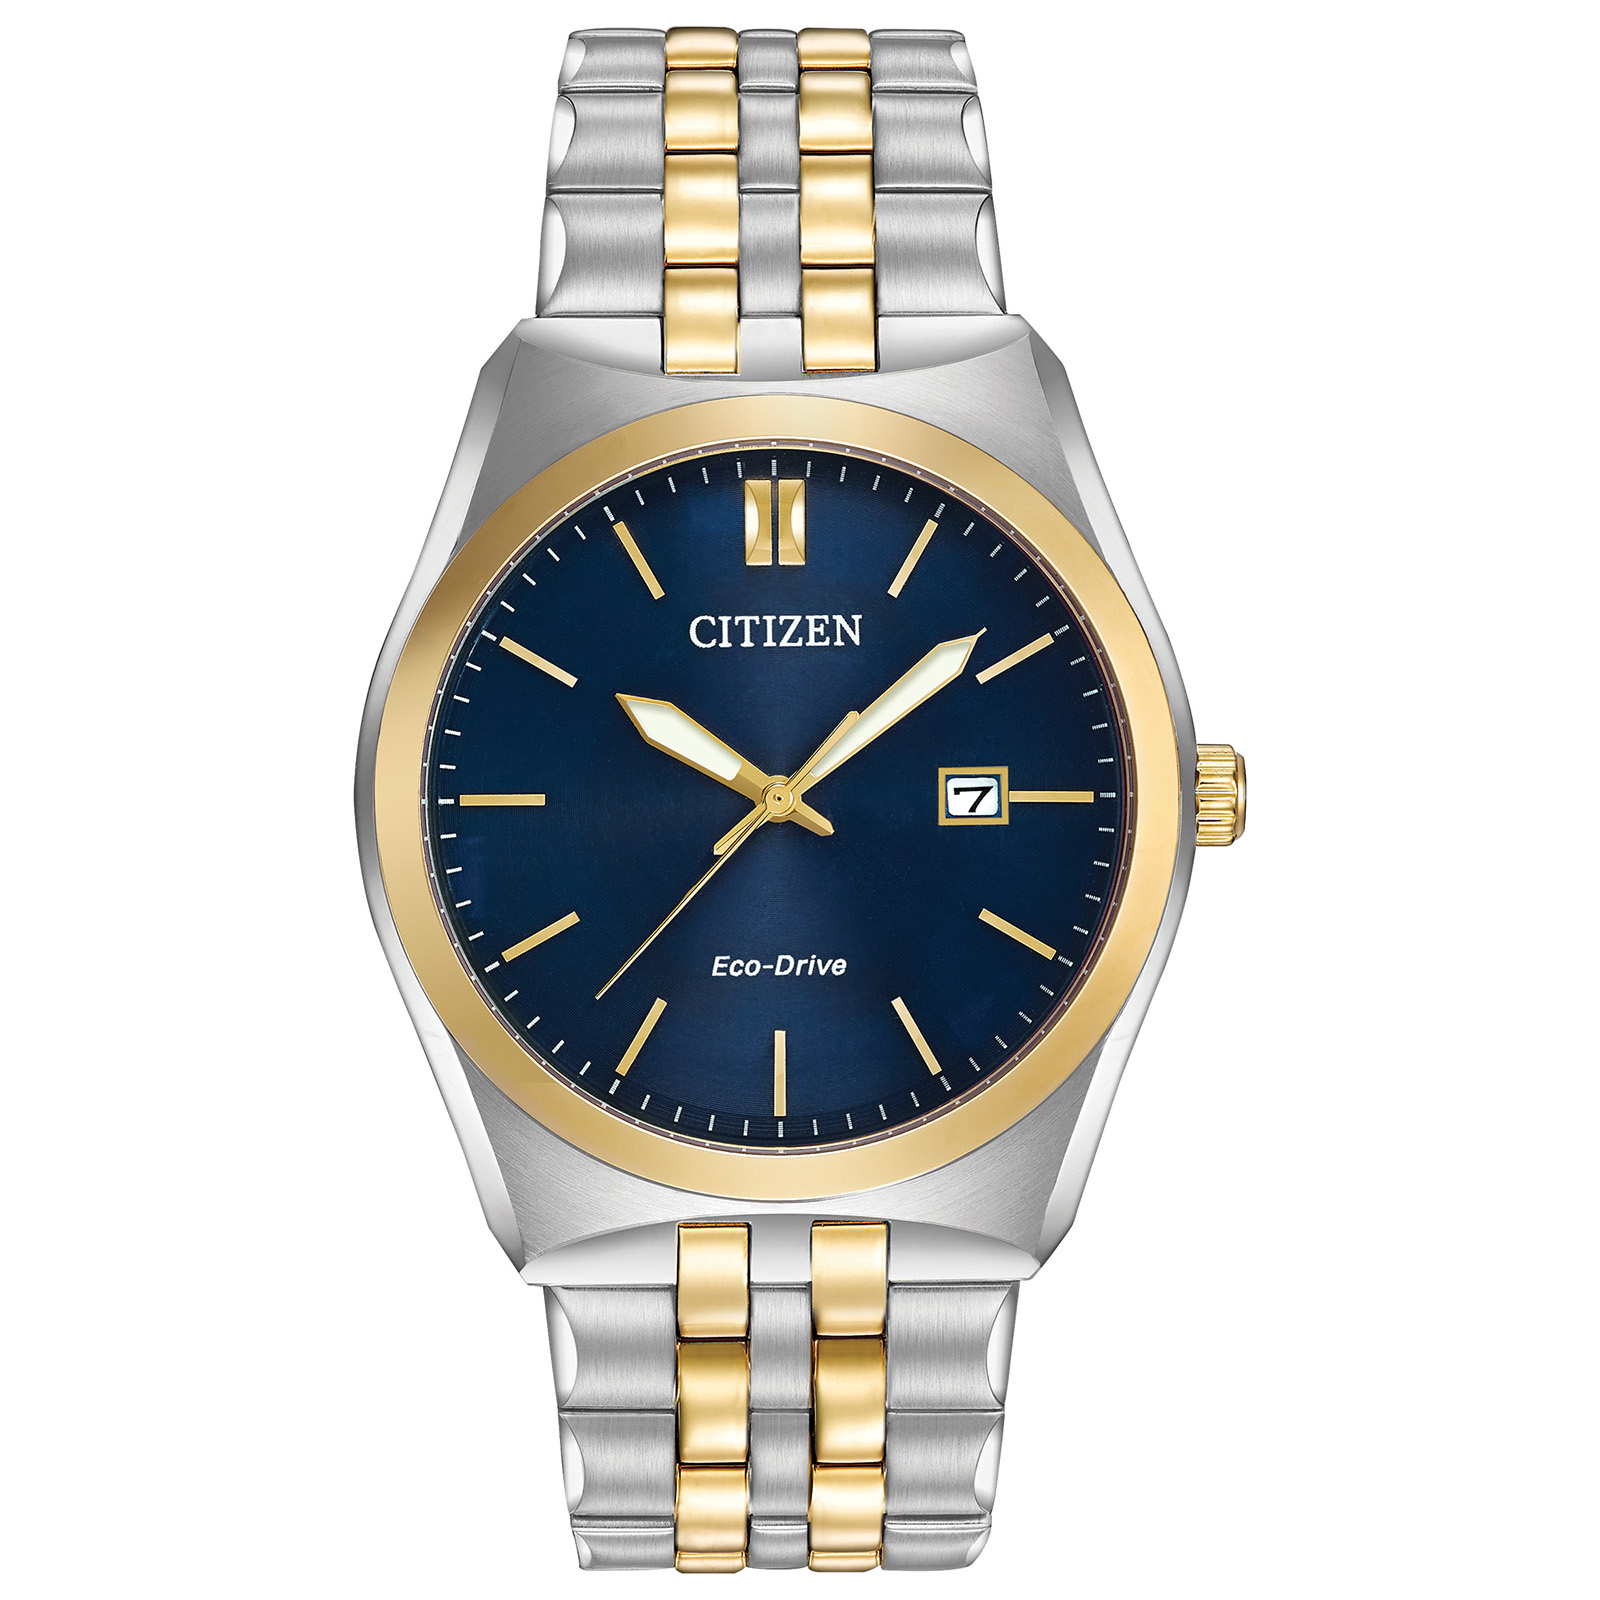 Citizen WR100 Eco-Drive Mens Watch | Classic Watches | Watches | Goldsmiths